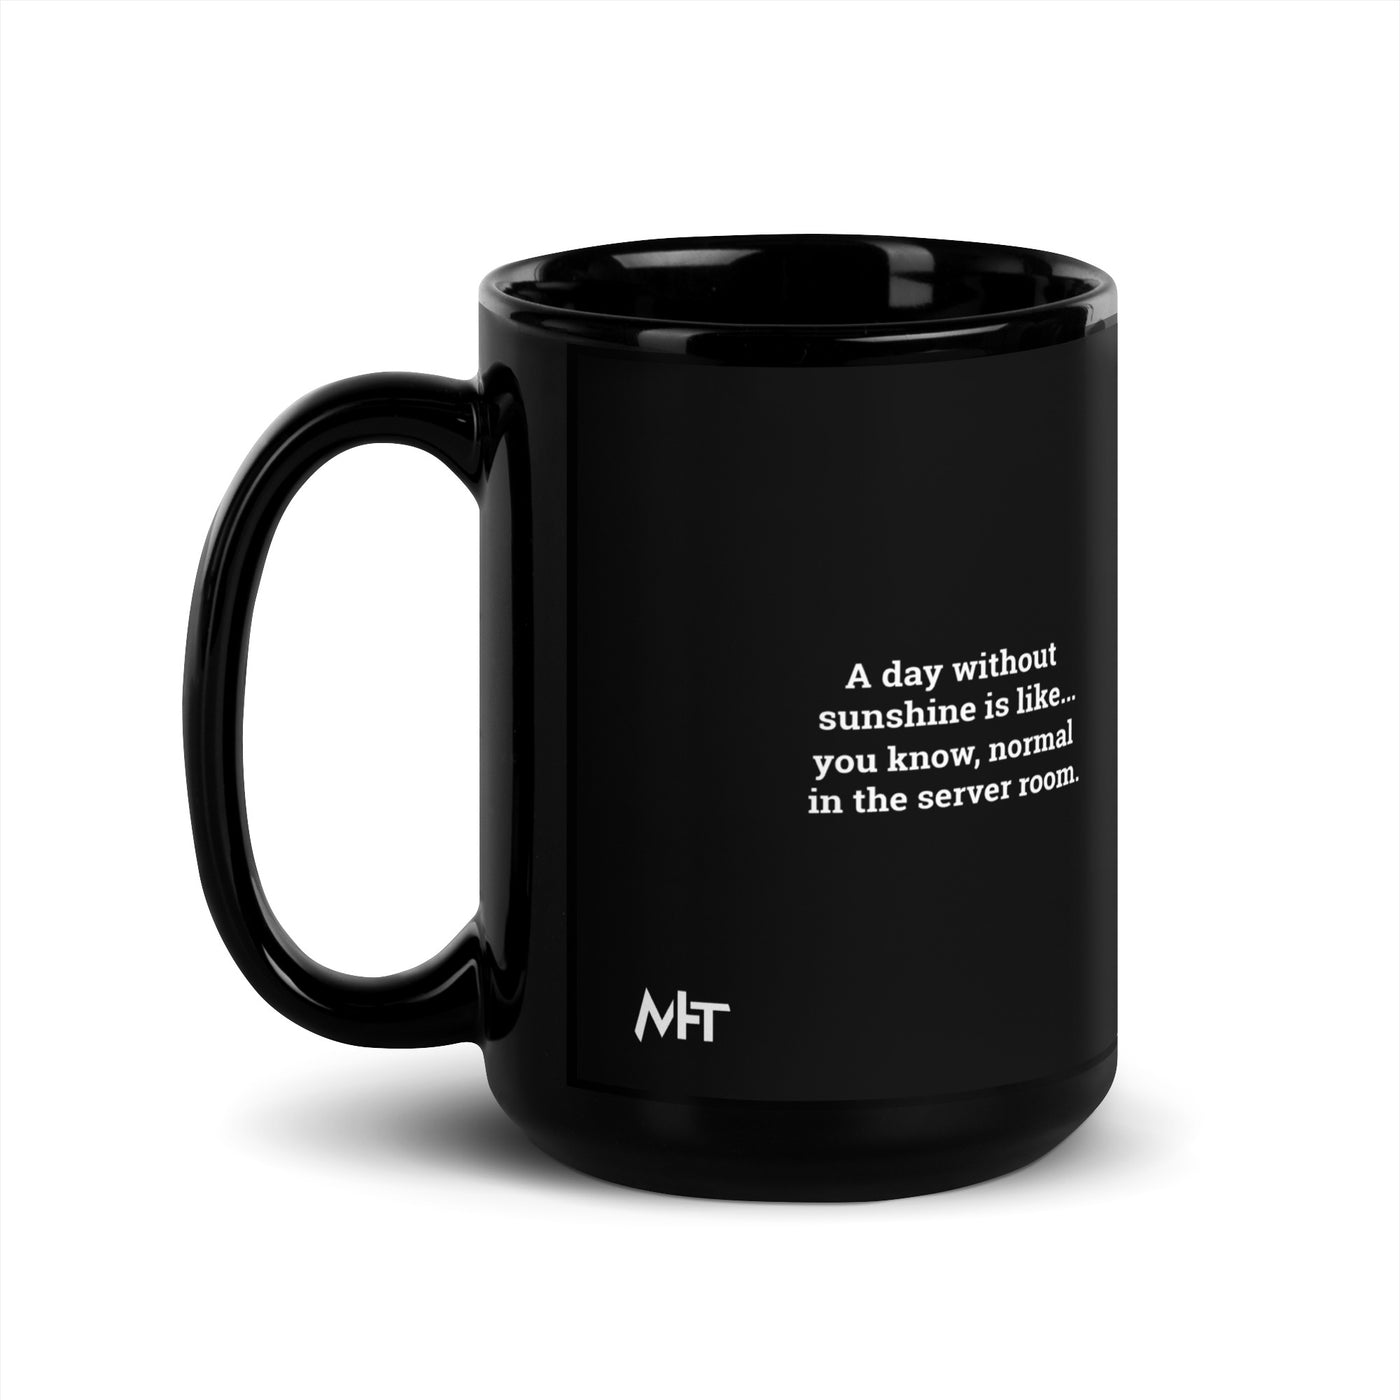 A day without sunshine is like you know, normal in the server room V2 - Black Glossy Mug